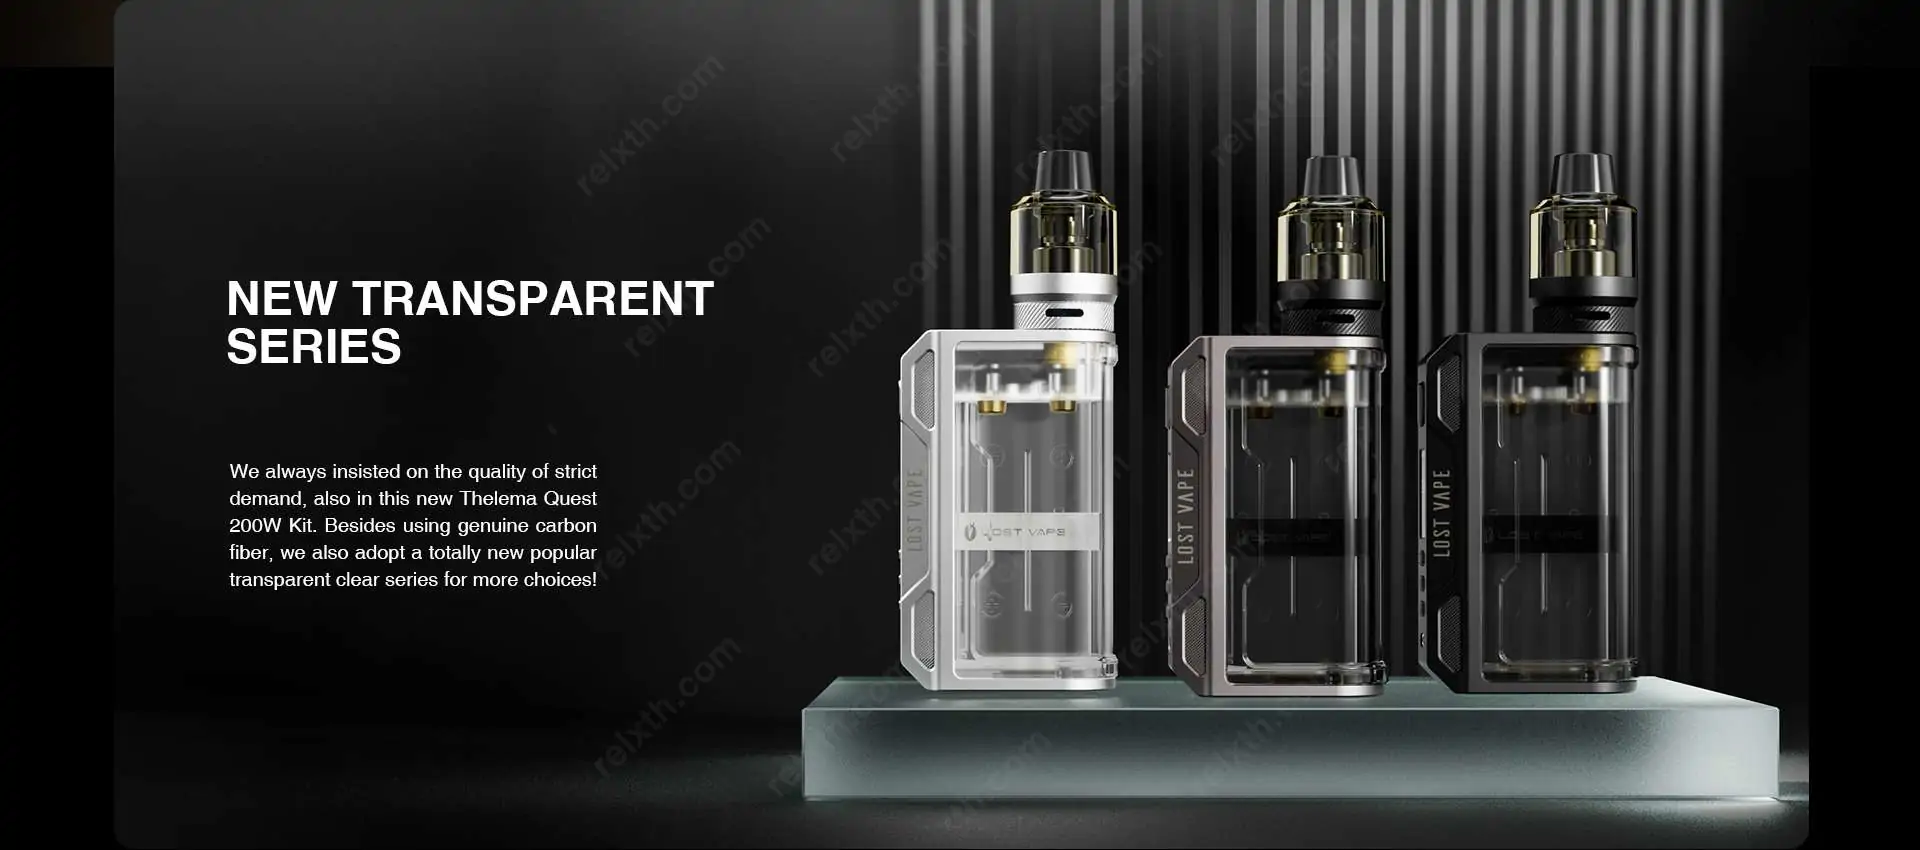 lost vape thelema quest 200w kit clear 4